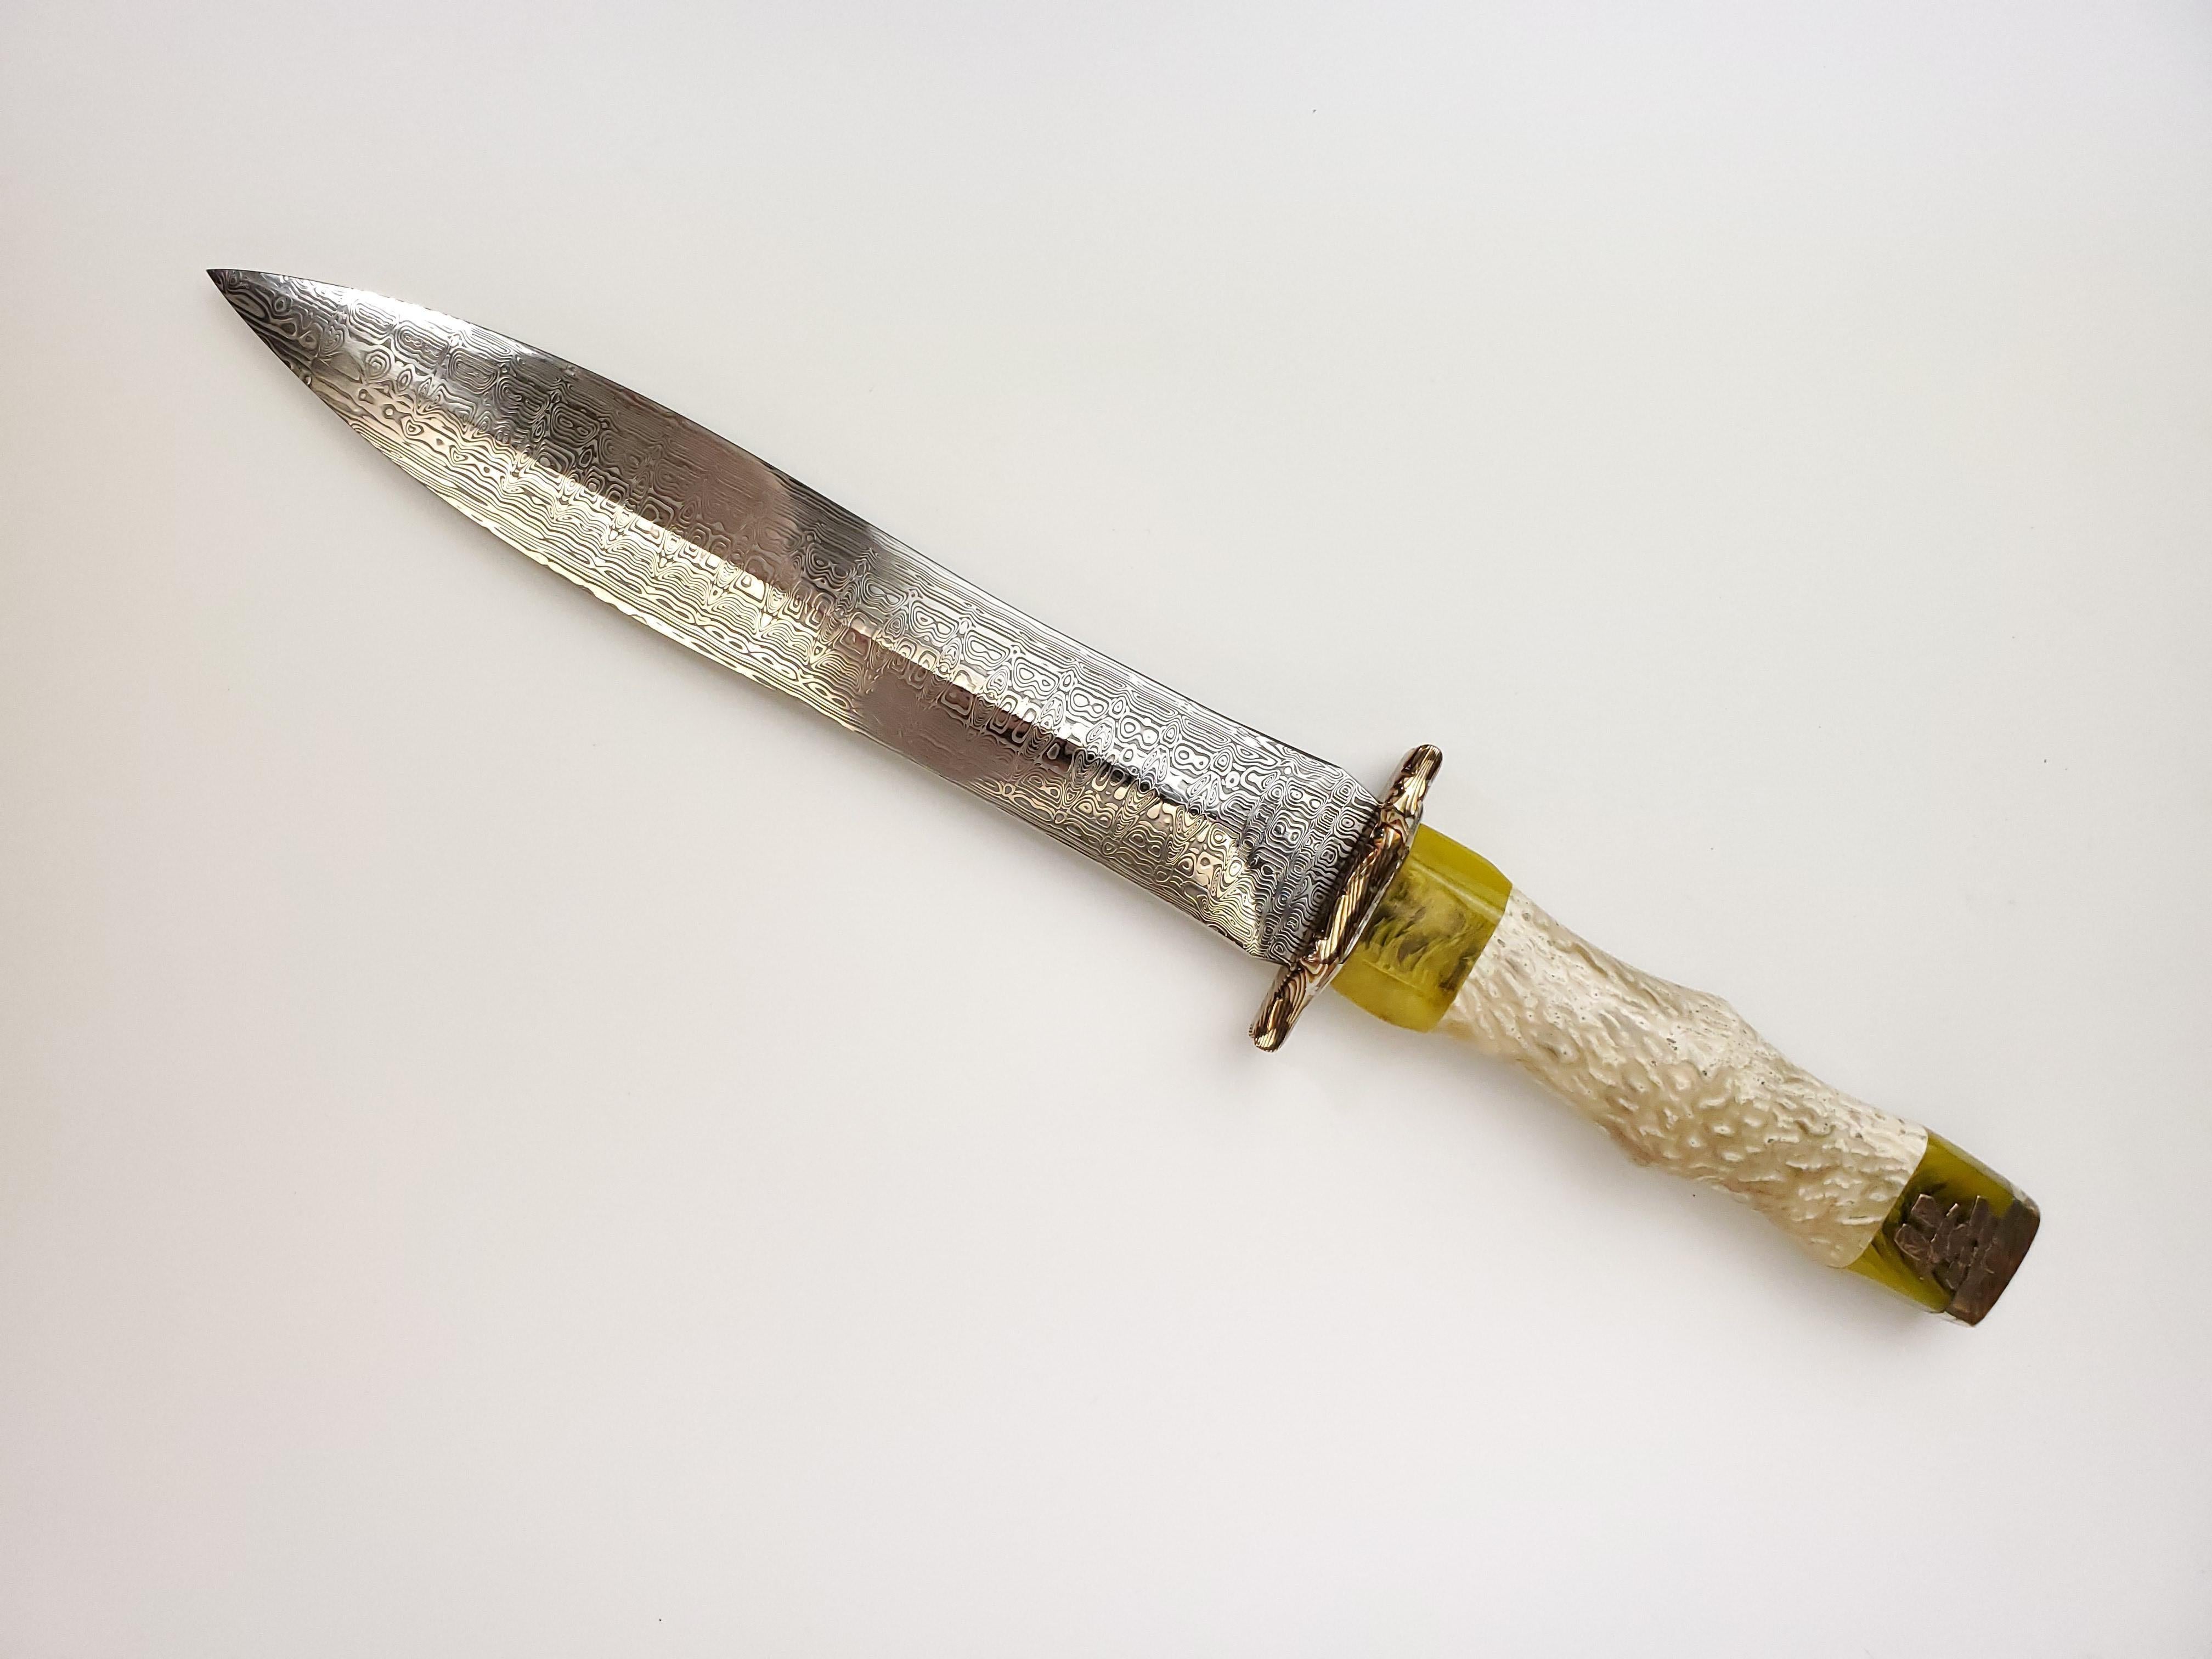 George Roberts

As in all handmade objects, there is always an expression of art and craft in all but the very crudest.

Handmade weapons are no exception and there are master knife makers around the world. Many create knives and blades solely for